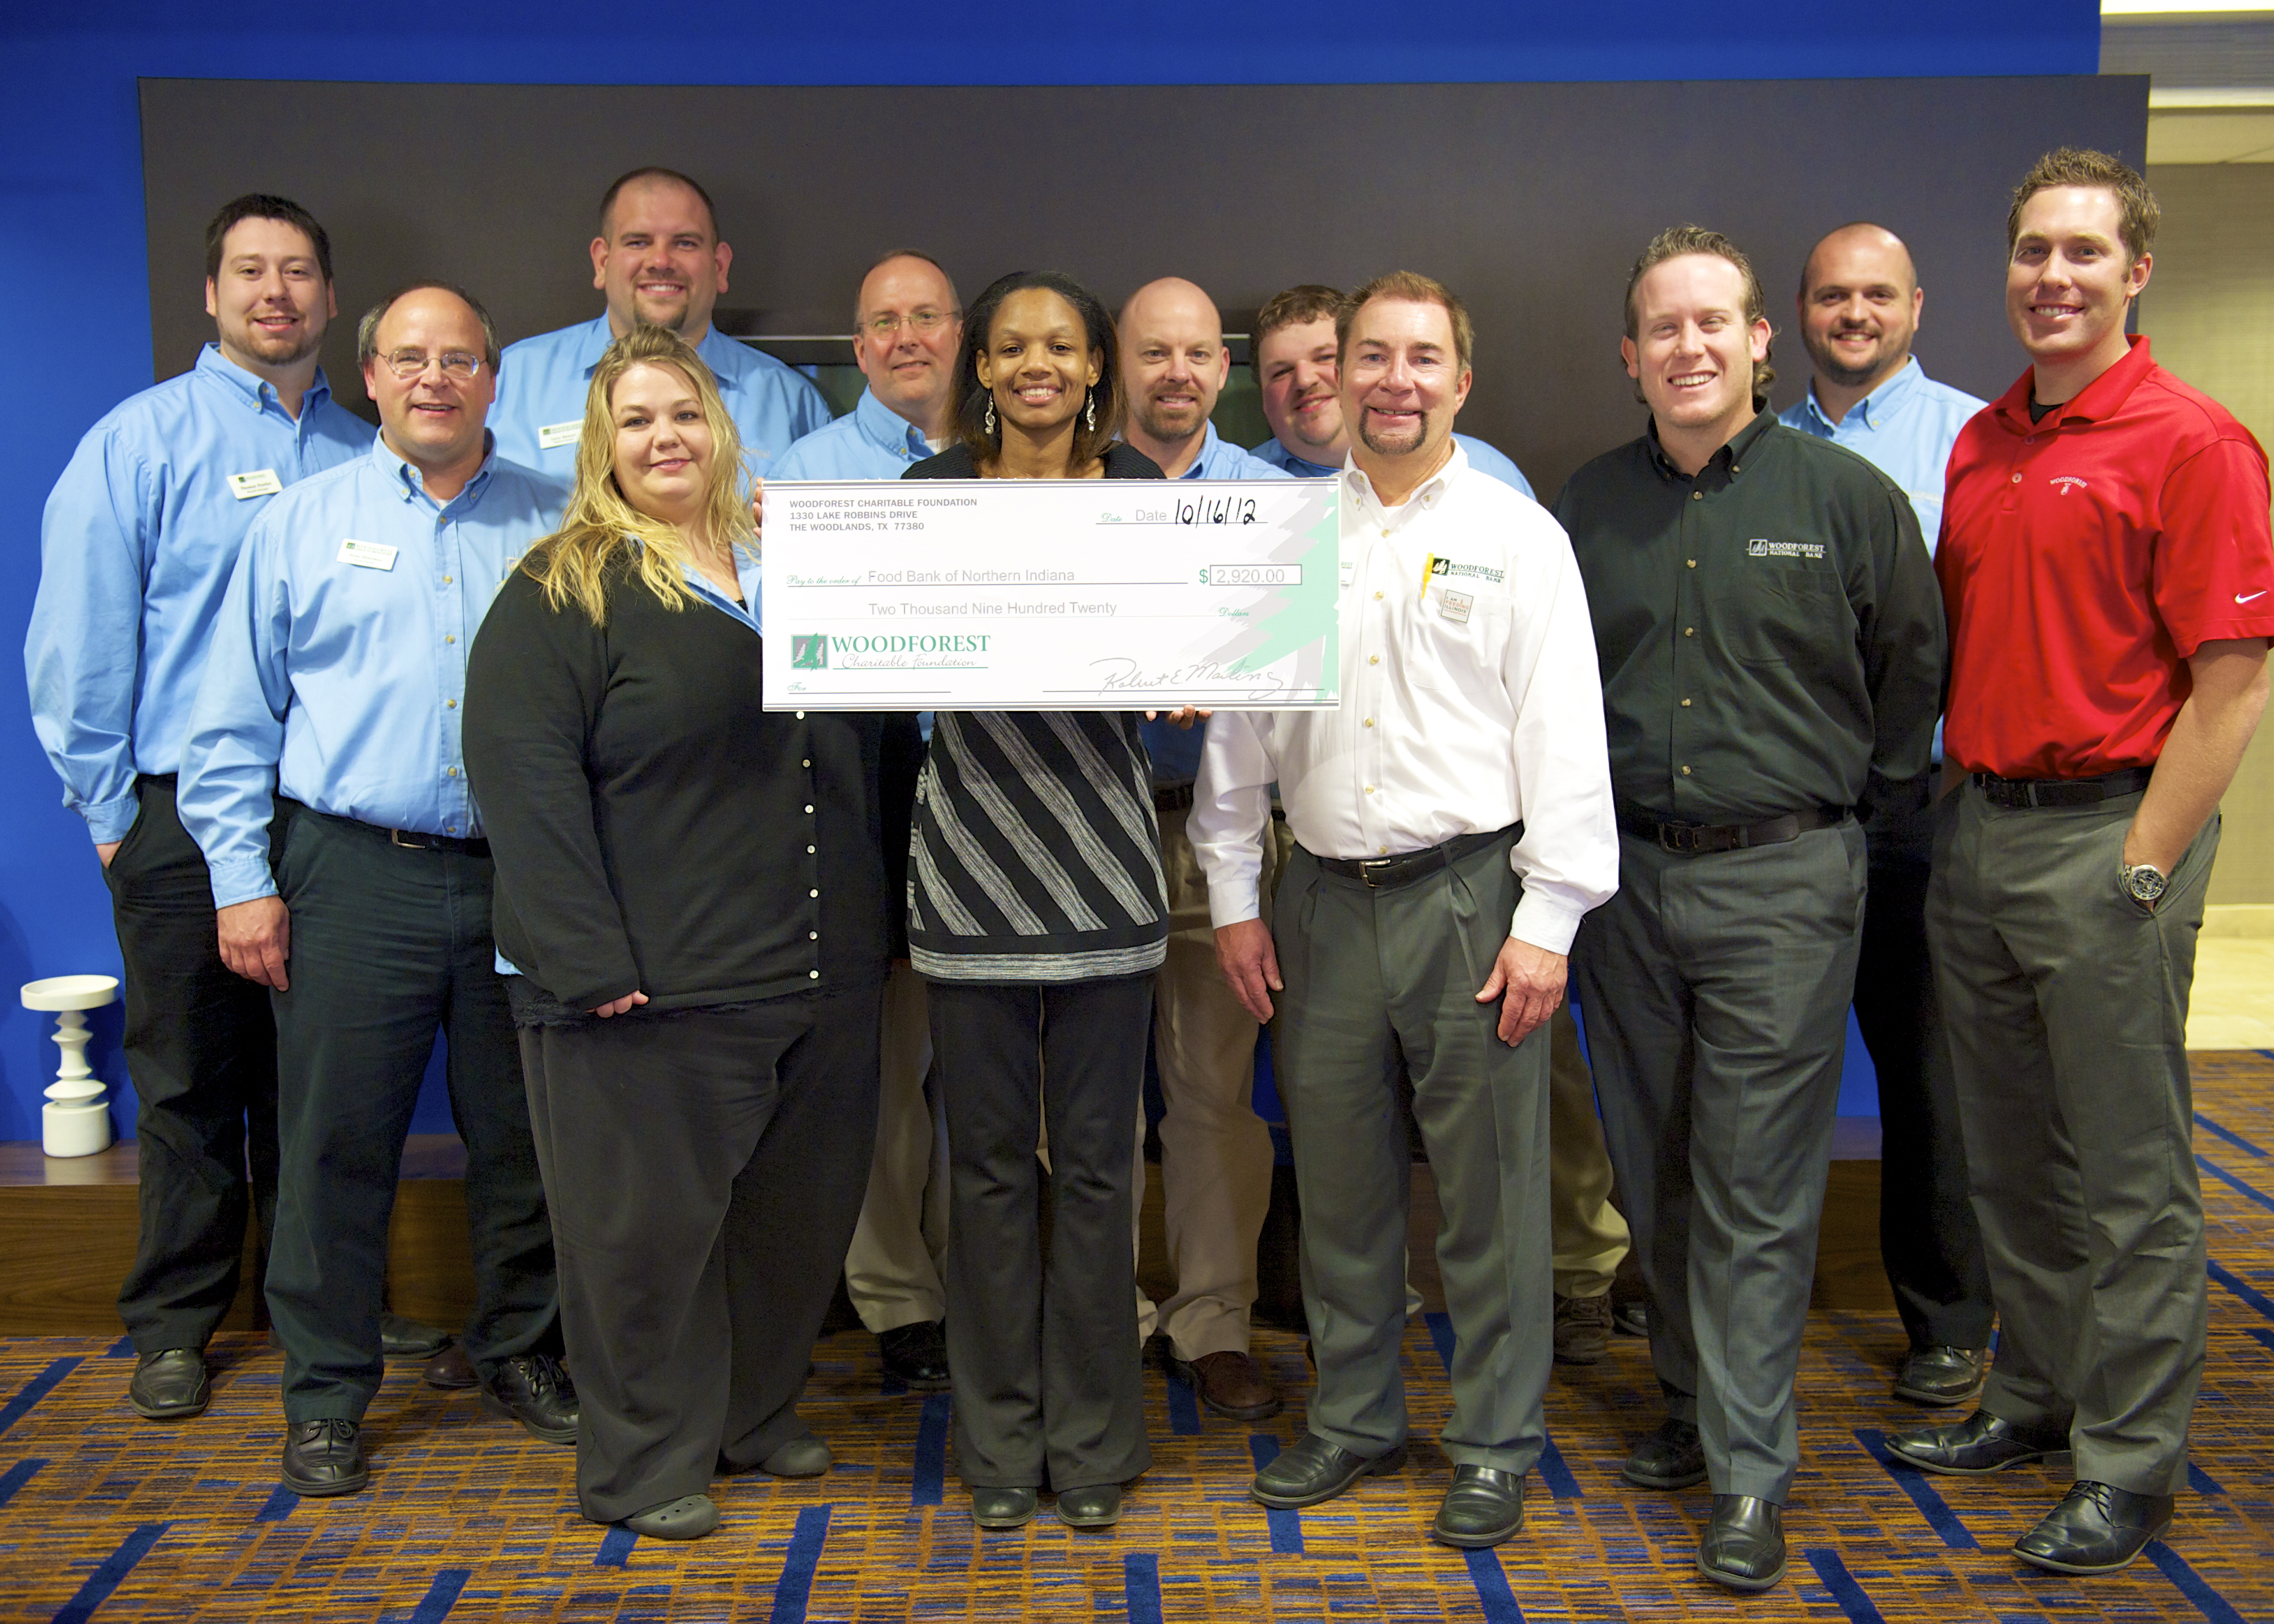 Food Bank of Northern Indiana receives $2,930 donation from Woodforest Charitable Foundation.